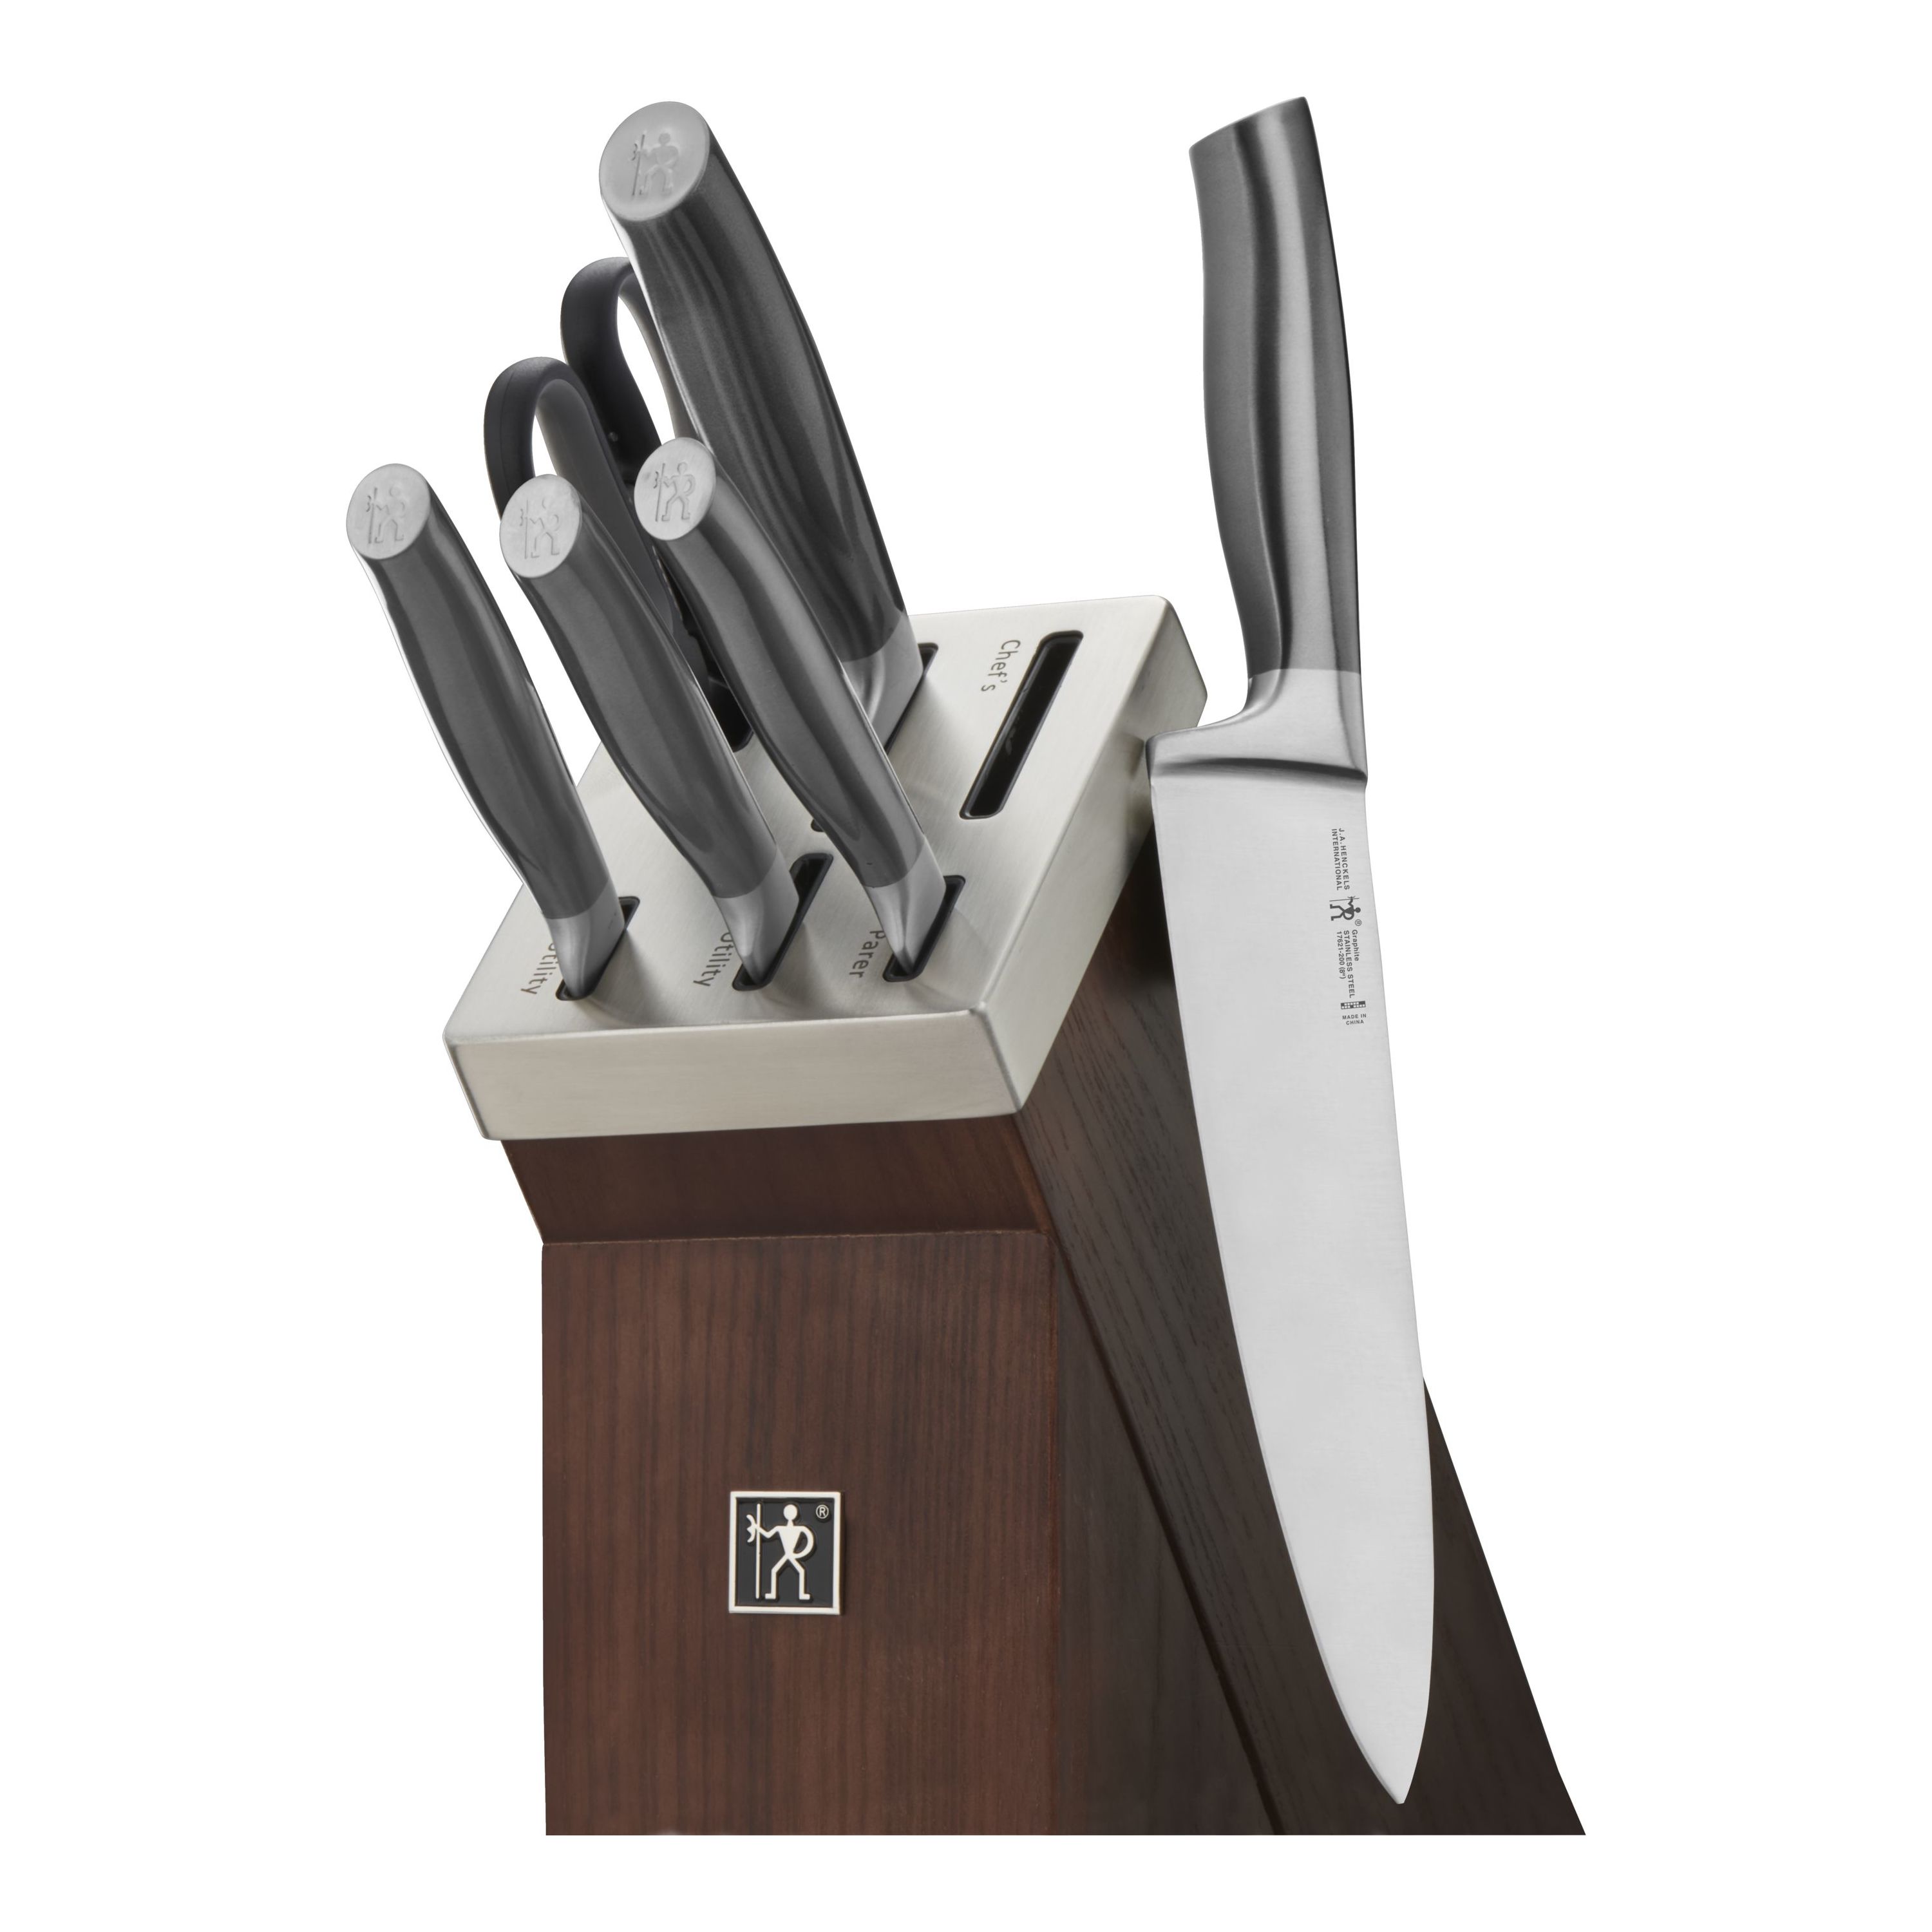 https://www.zwilling.com/on/demandware.static/-/Sites-zwilling-master-catalog/default/dw4a491b8b/images/large/17633-007_1.jpg